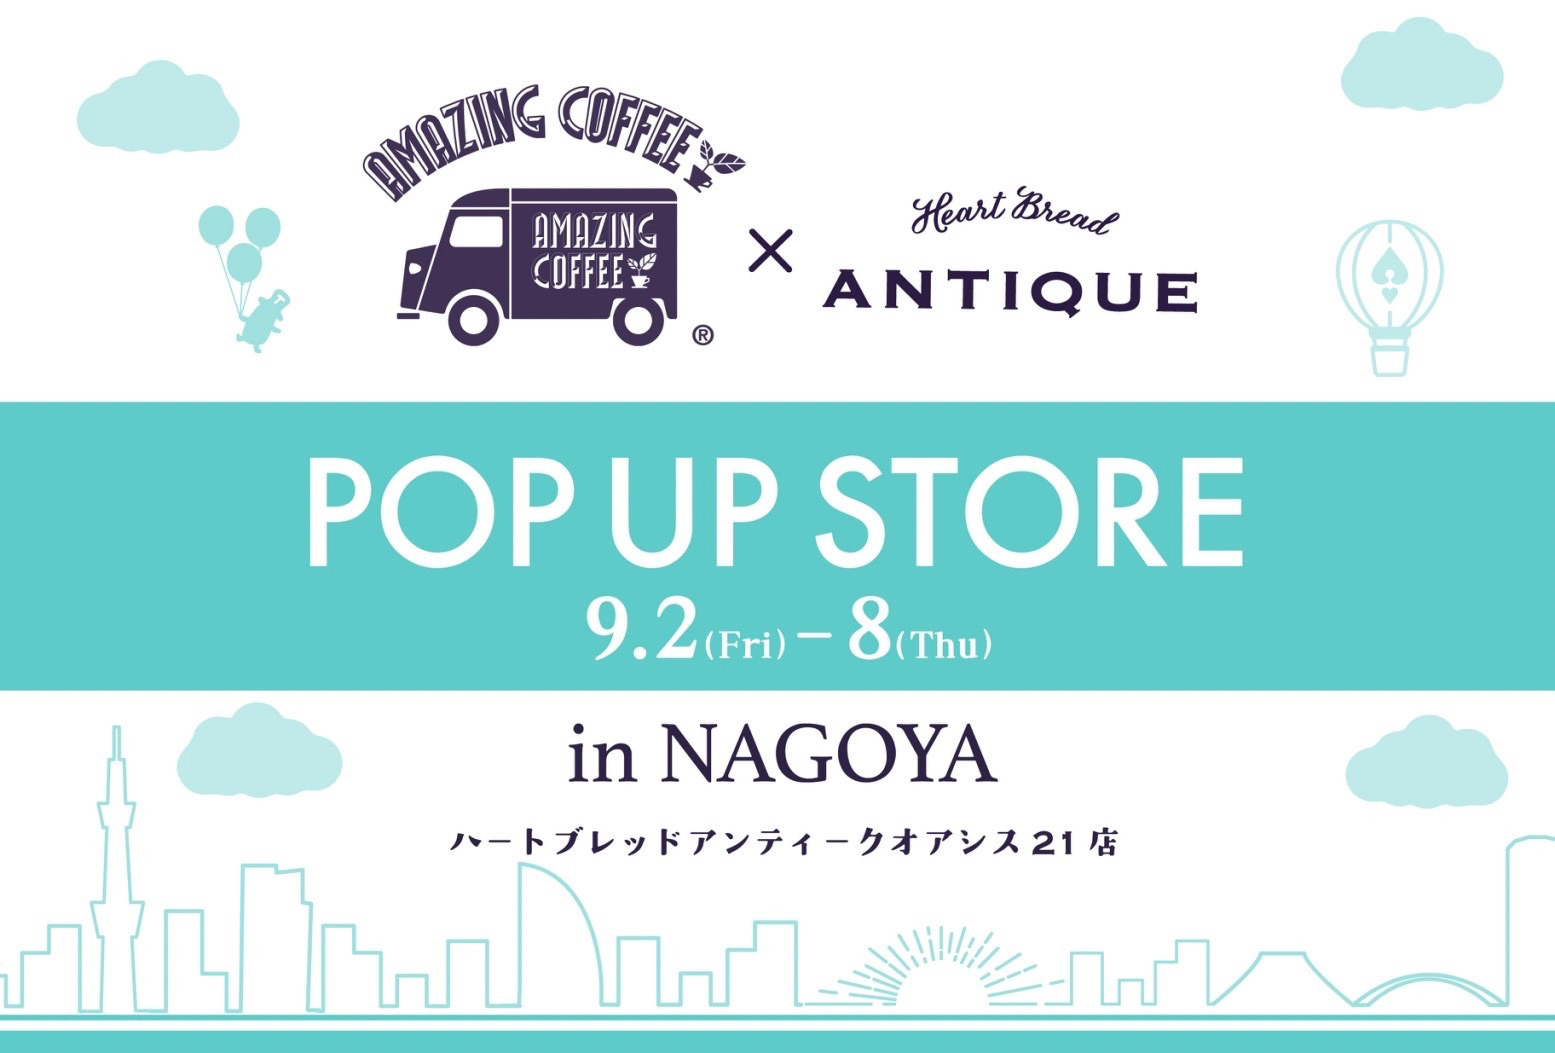 【Heart Bread ANTIQUE × AMAZING COFFEE】POP UP STORE in名古屋 9月2日(金)よりオアシス21店にて開催！